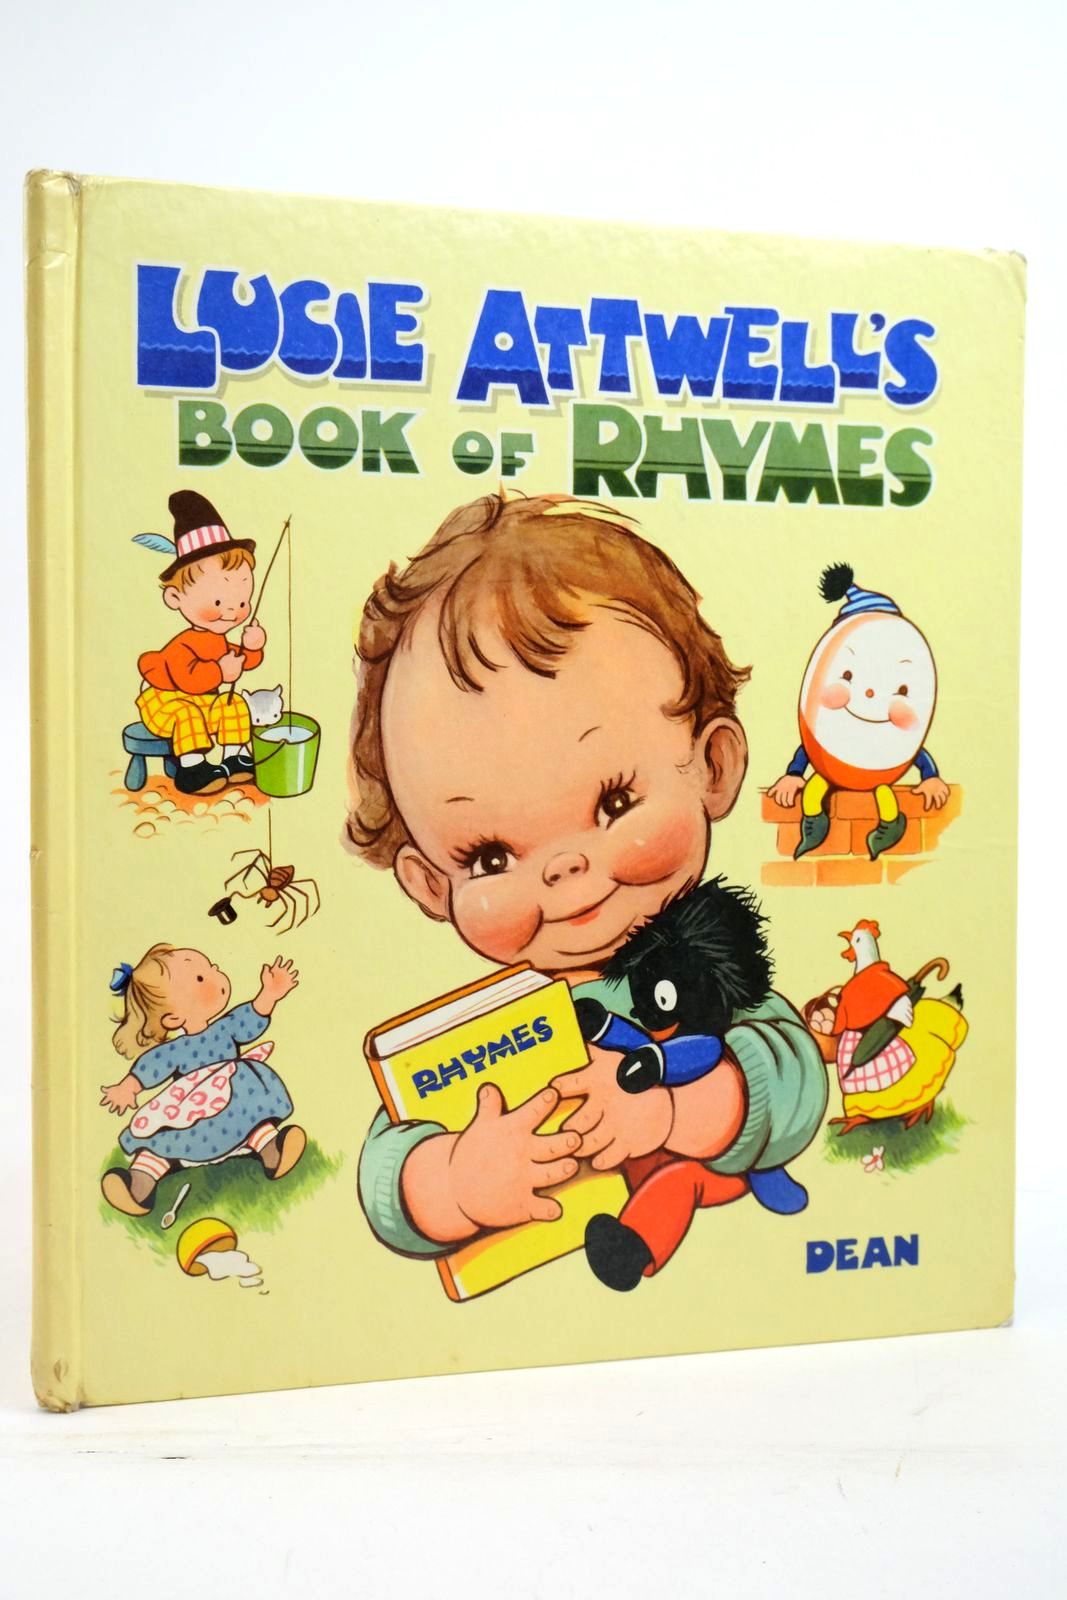 Photo of LUCIE ATTWELL'S BOOK OF RHYMES written by Attwell, Mabel Lucie illustrated by Attwell, Mabel Lucie published by Dean & Son Ltd. (STOCK CODE: 2136899)  for sale by Stella & Rose's Books